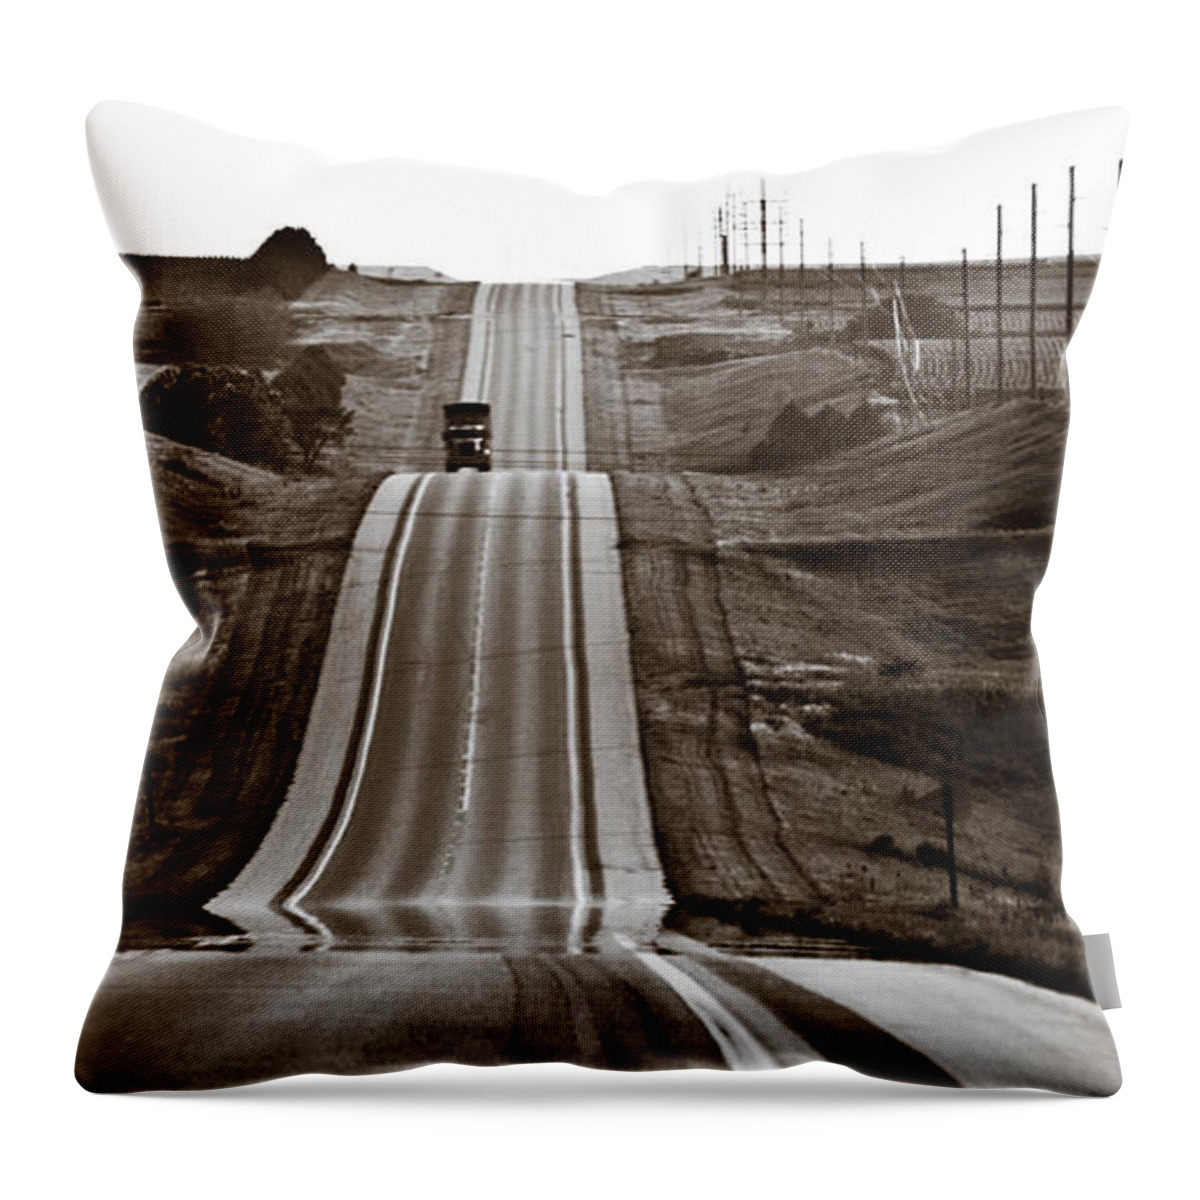 Nebraska Throw Pillow featuring the photograph A Country Mile 2 by Marilyn Hunt